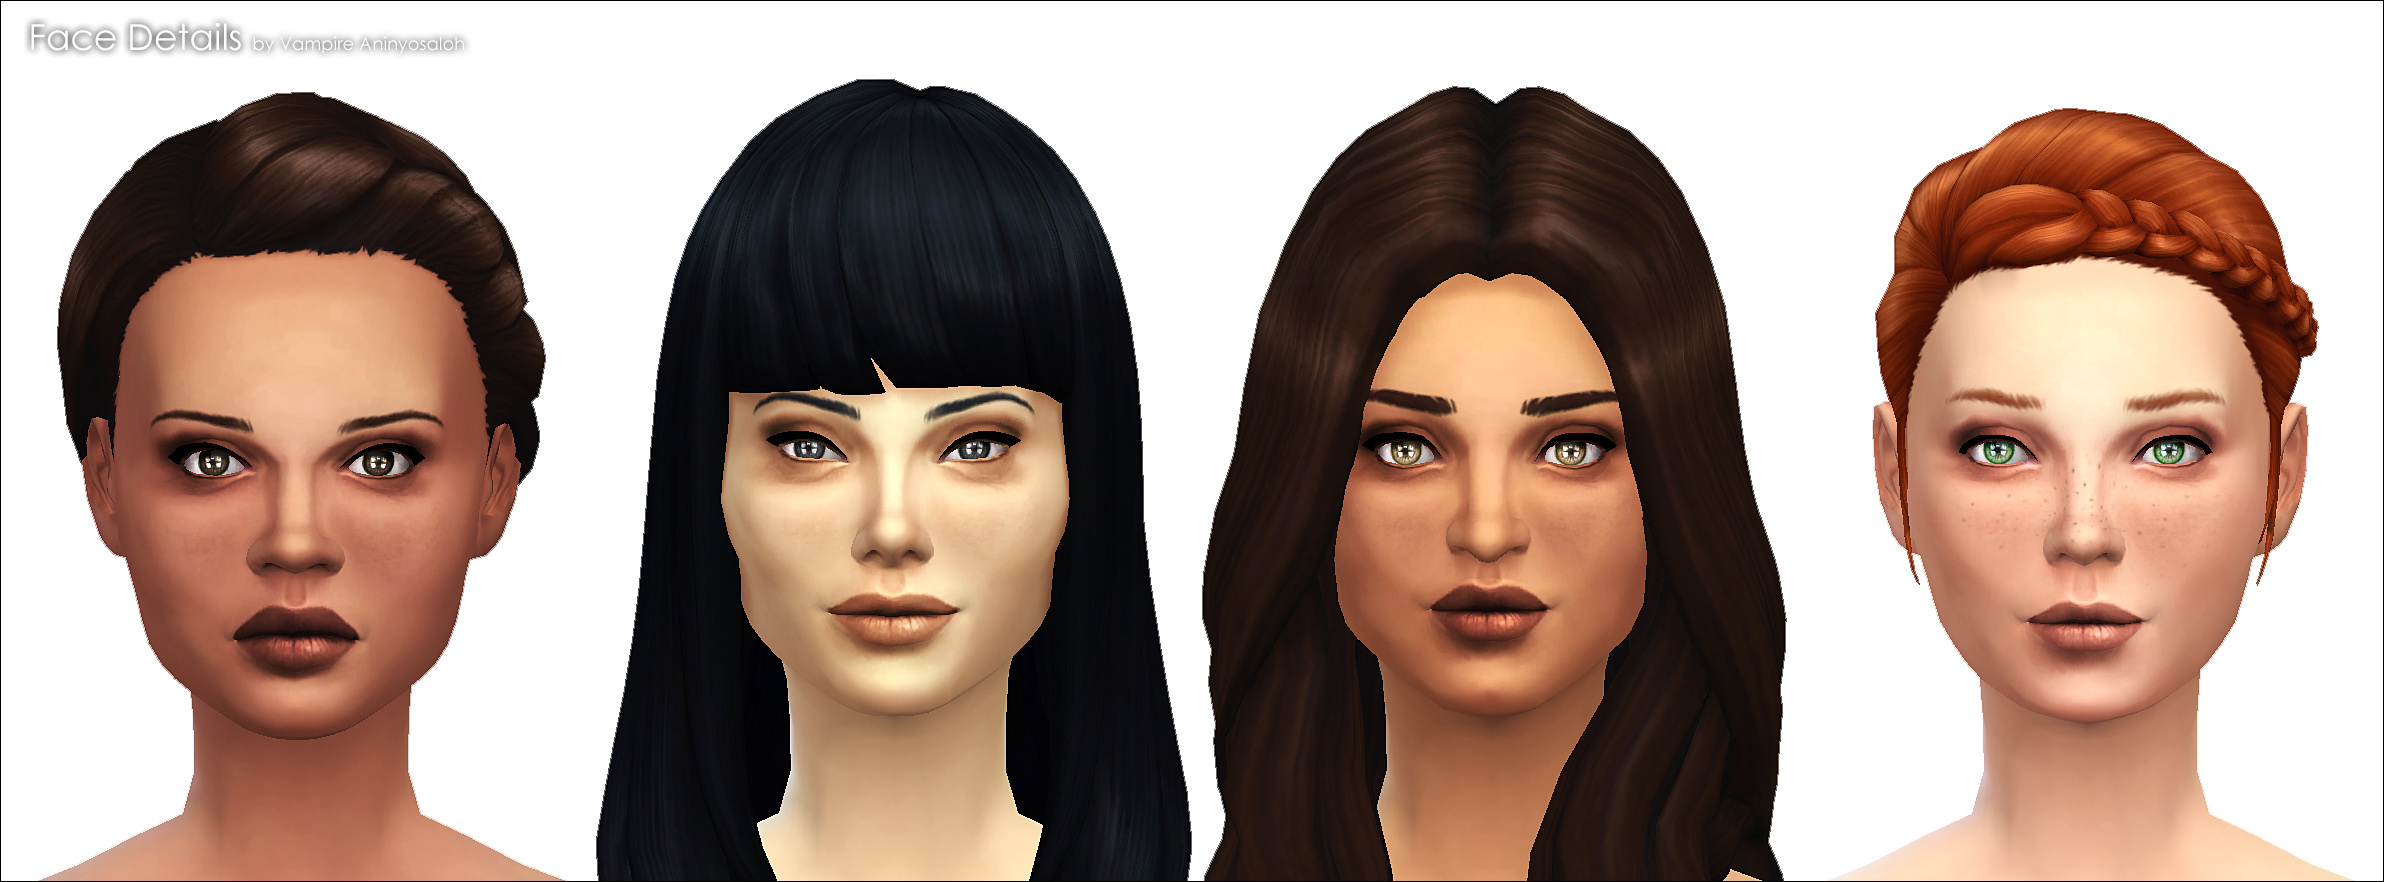 Sims 4 Updates, Mod The Sims Face Details Face Overlay, Remussims Wrinkles ...